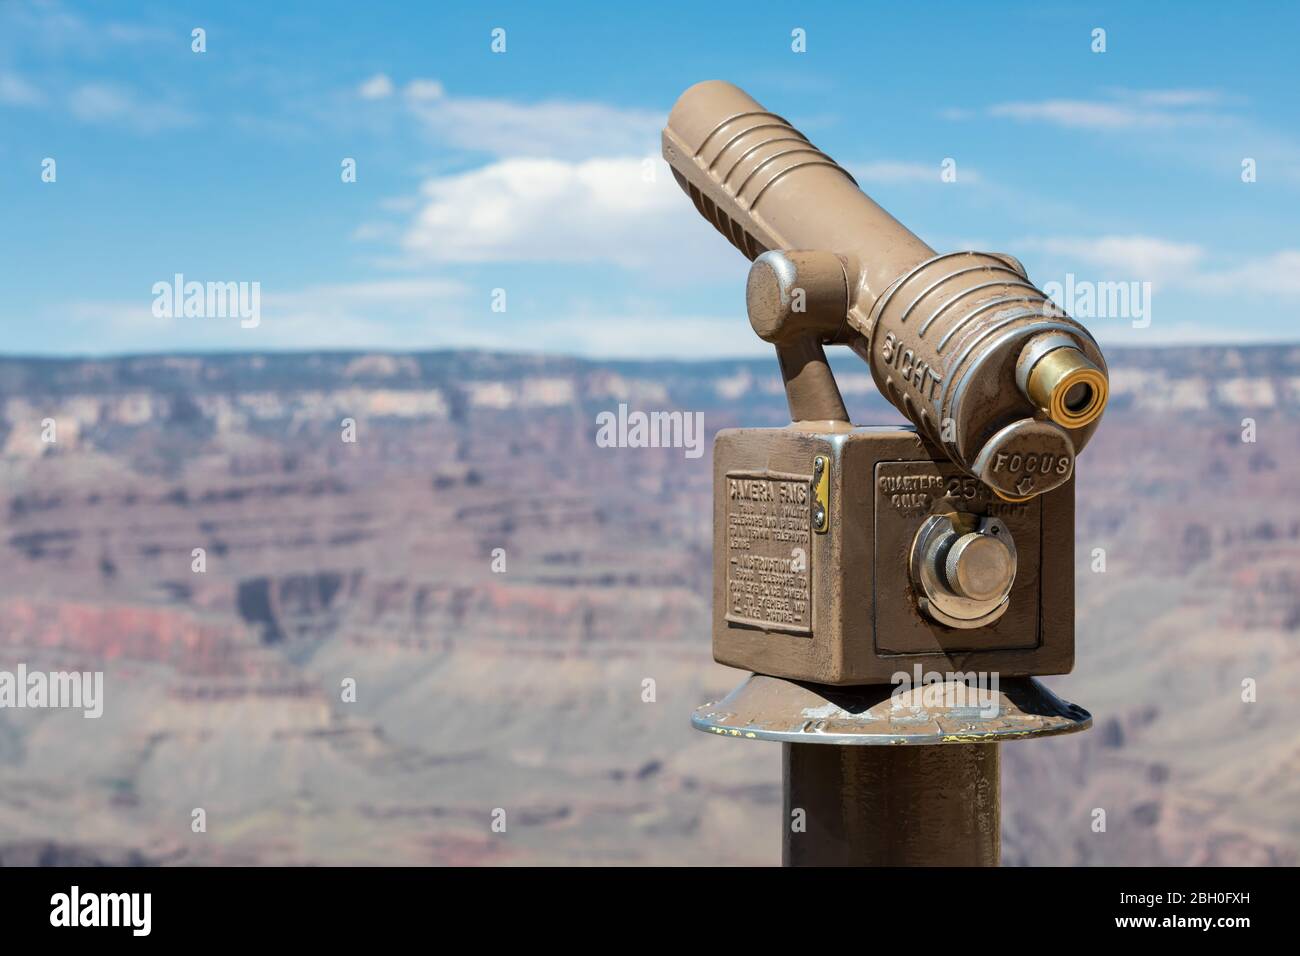 Close up of a steel coin-operated binocular overlooking the Grand Canyon Stock Photo